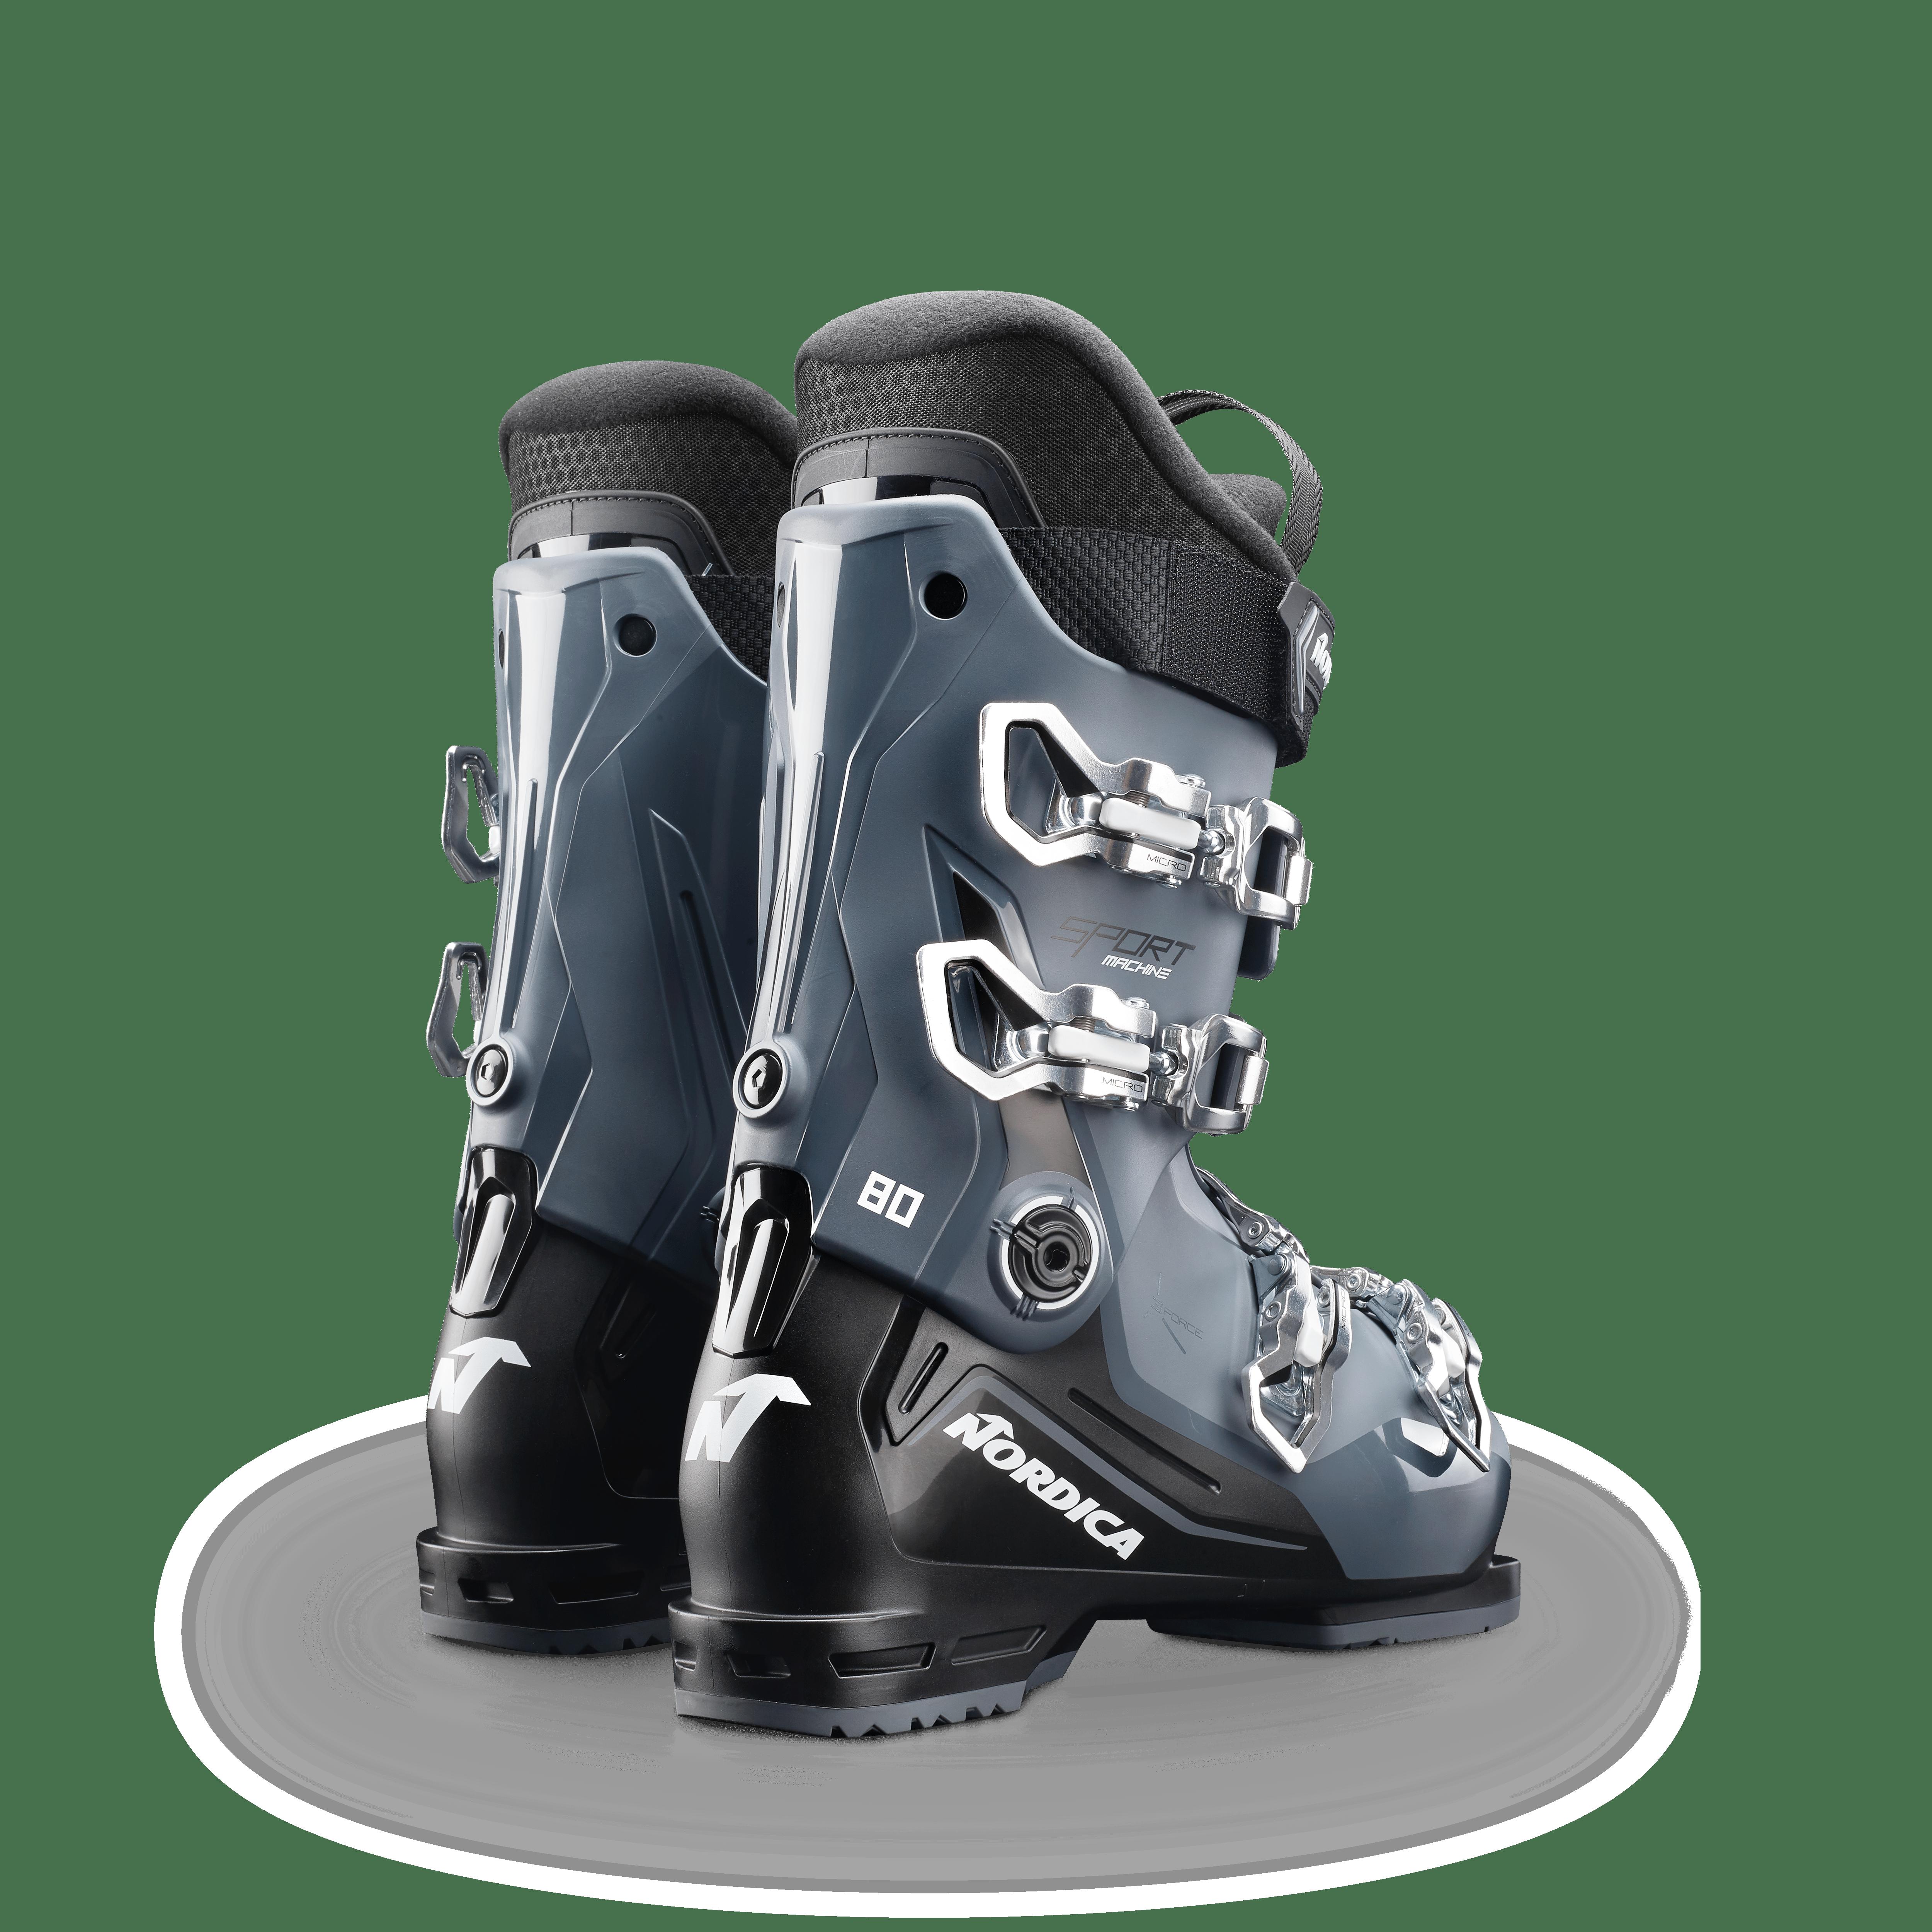 Sportmachine 3 80 - Nordica - Skis and Boots – Official website